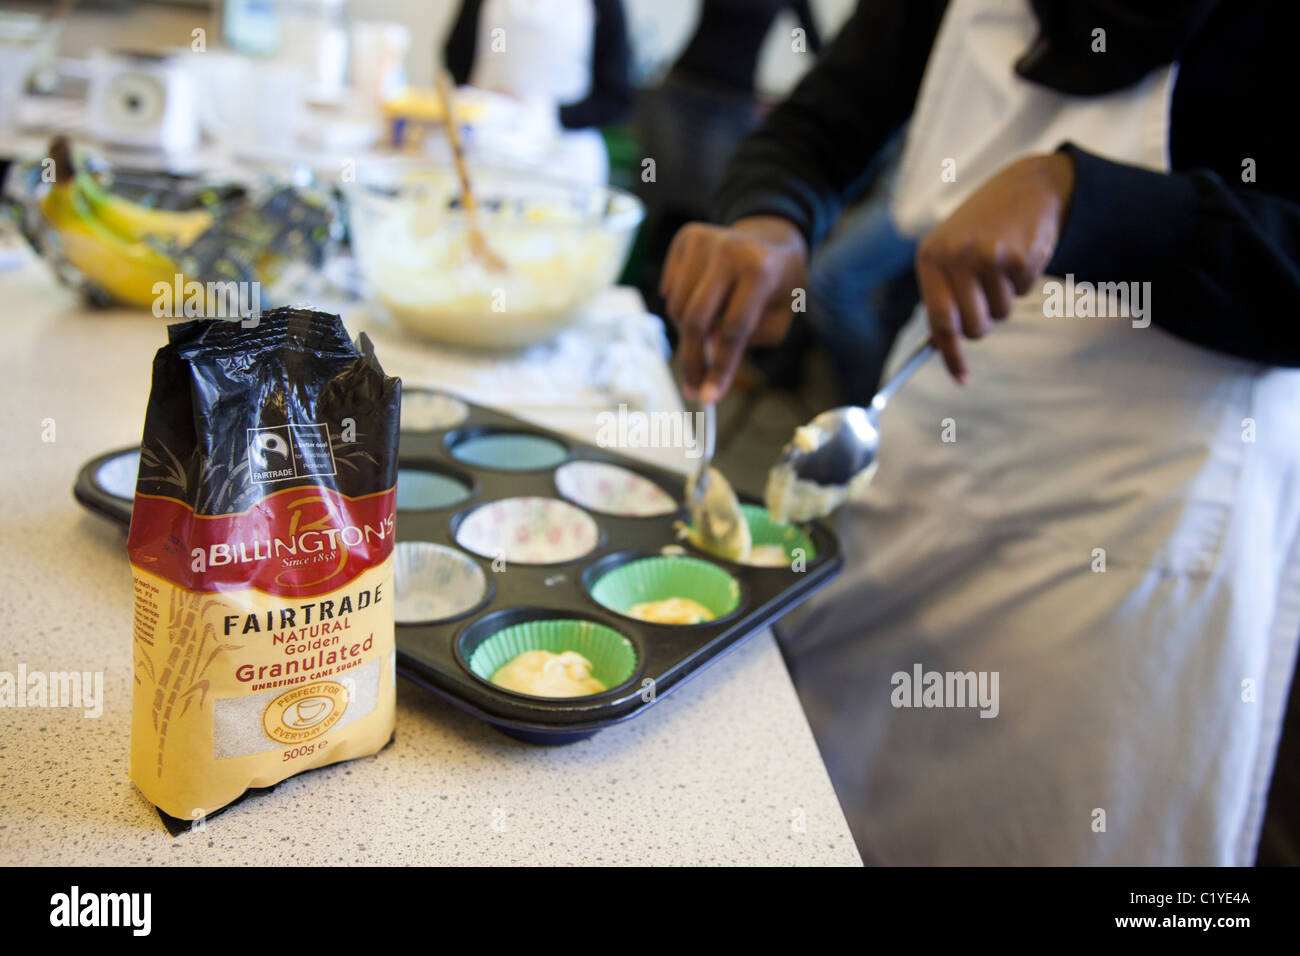 cooking fairtrade 'fair trade' products Stock Photo